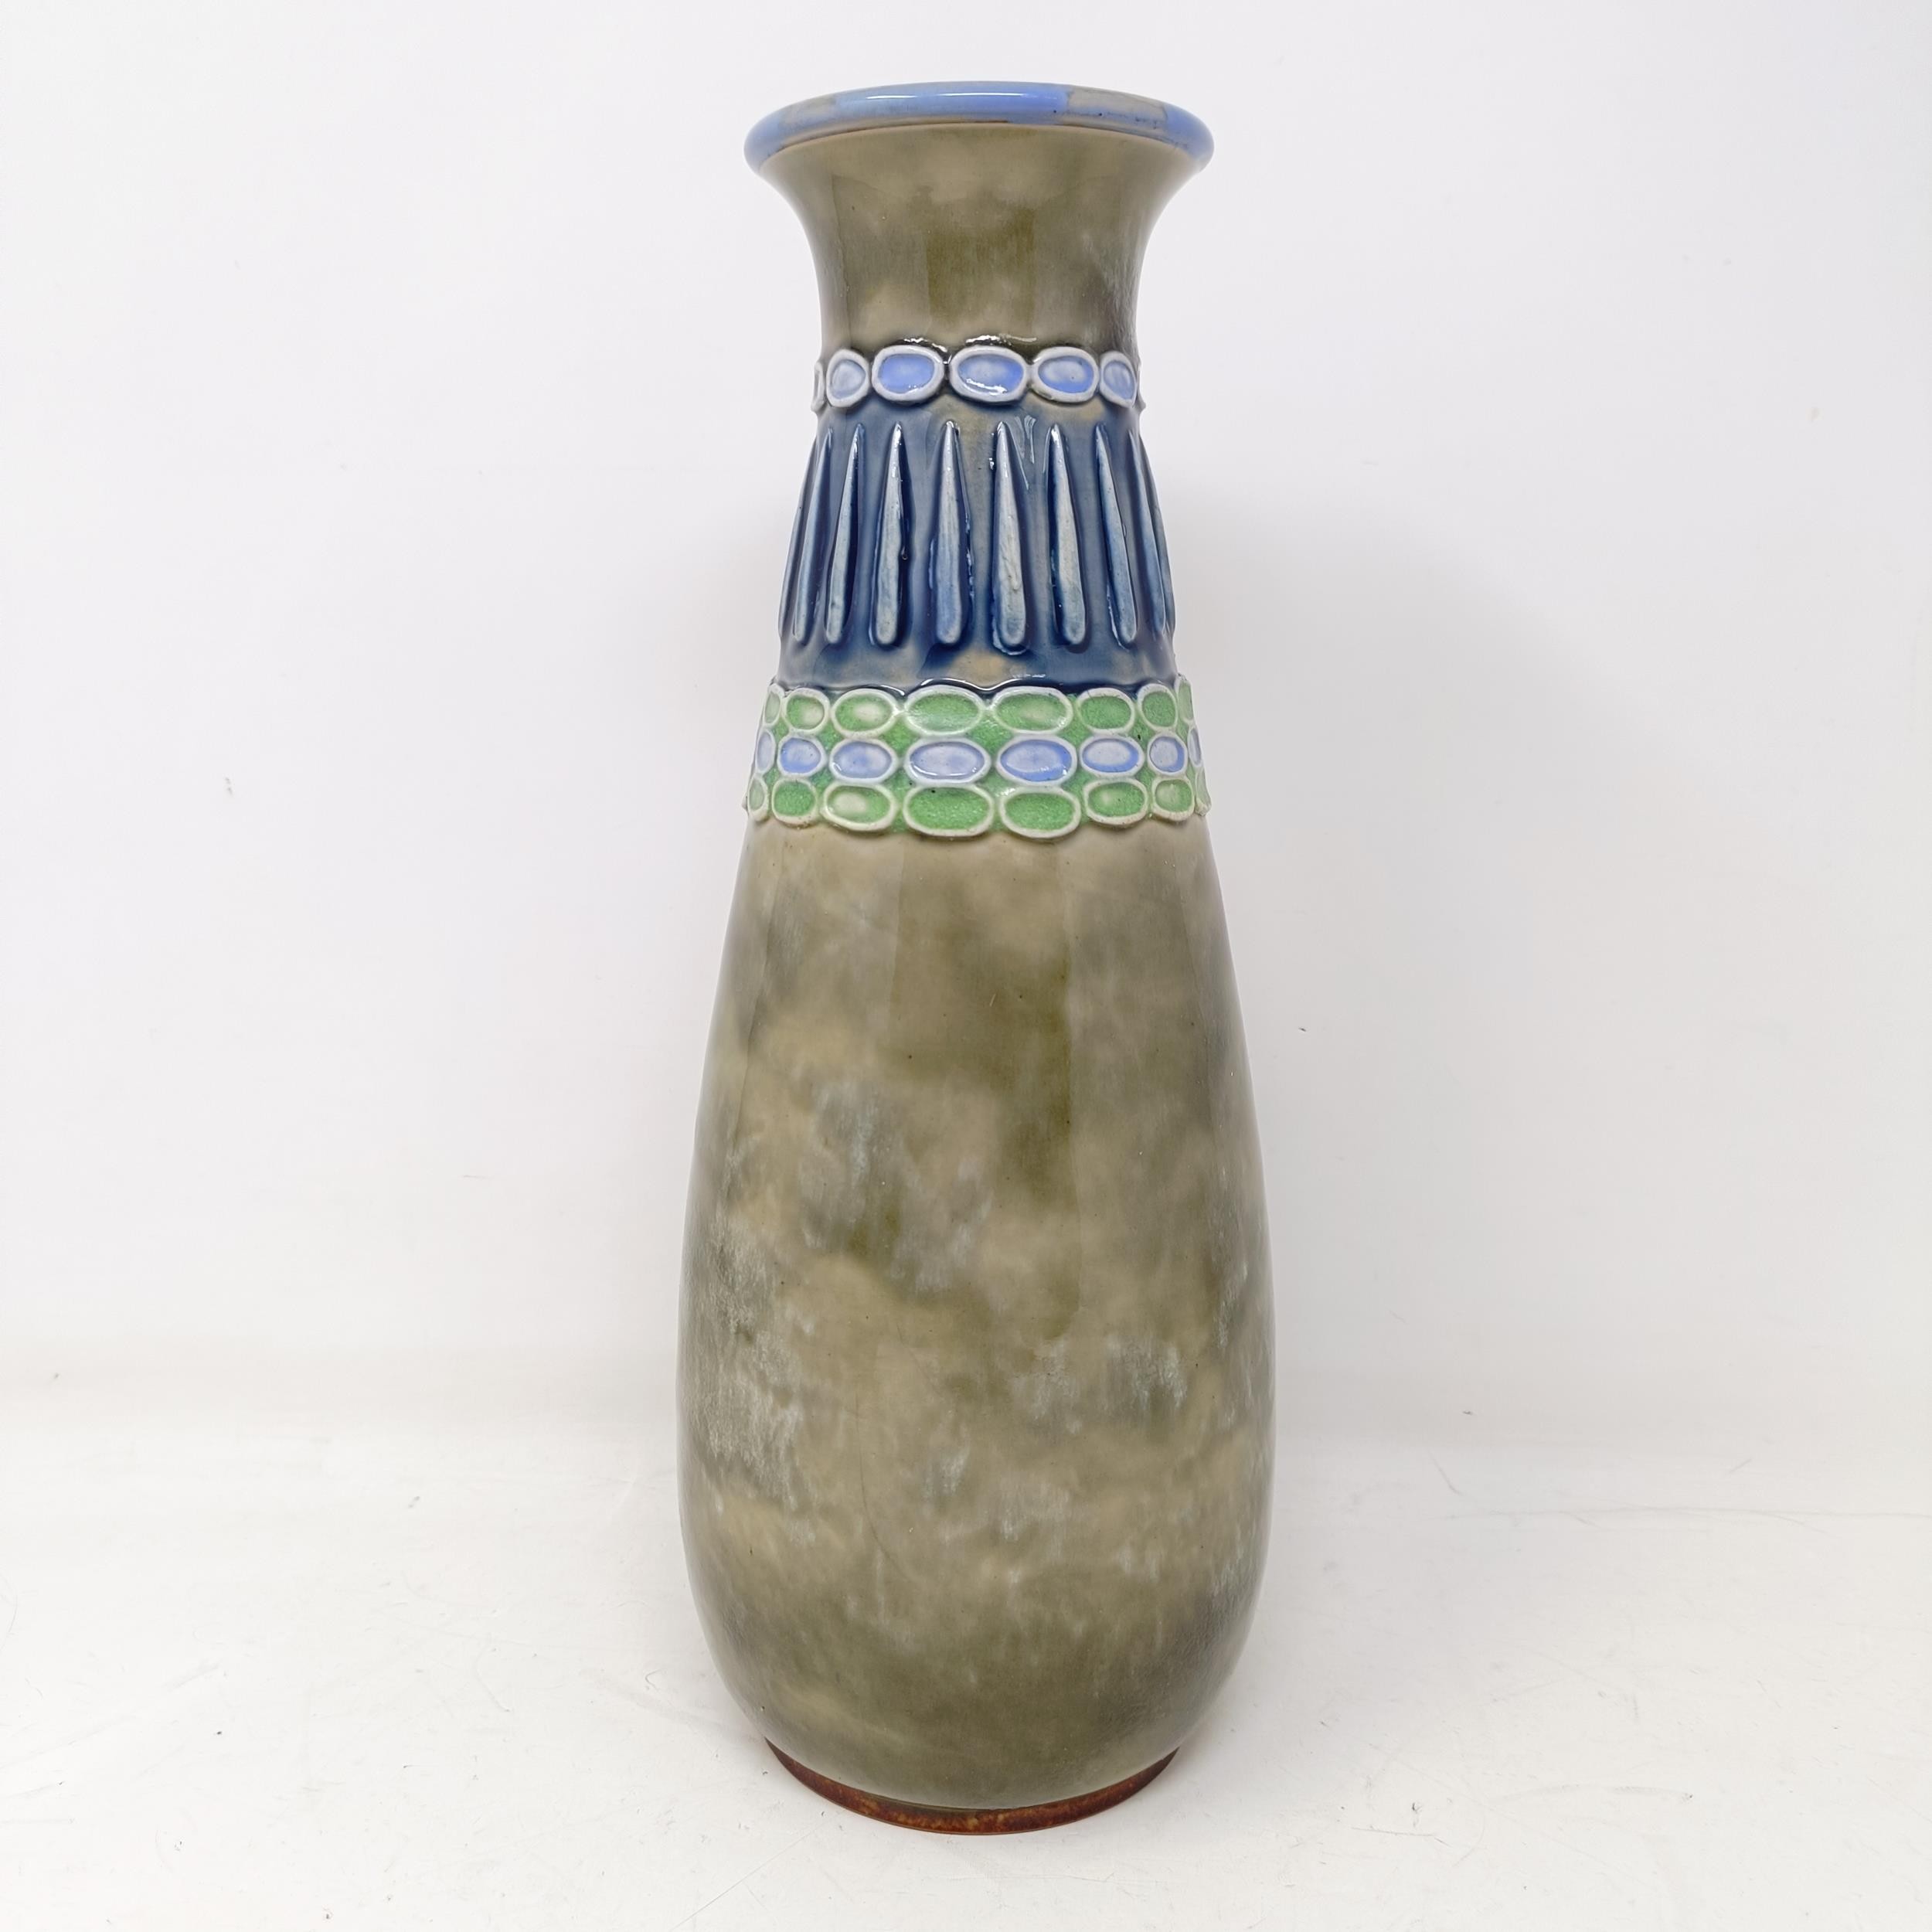 A Royal Doulton stoneware vase, by Bessie Newberry, 30 cm high, a Doulton Lambeth jug, 12 cm high, a - Image 11 of 14